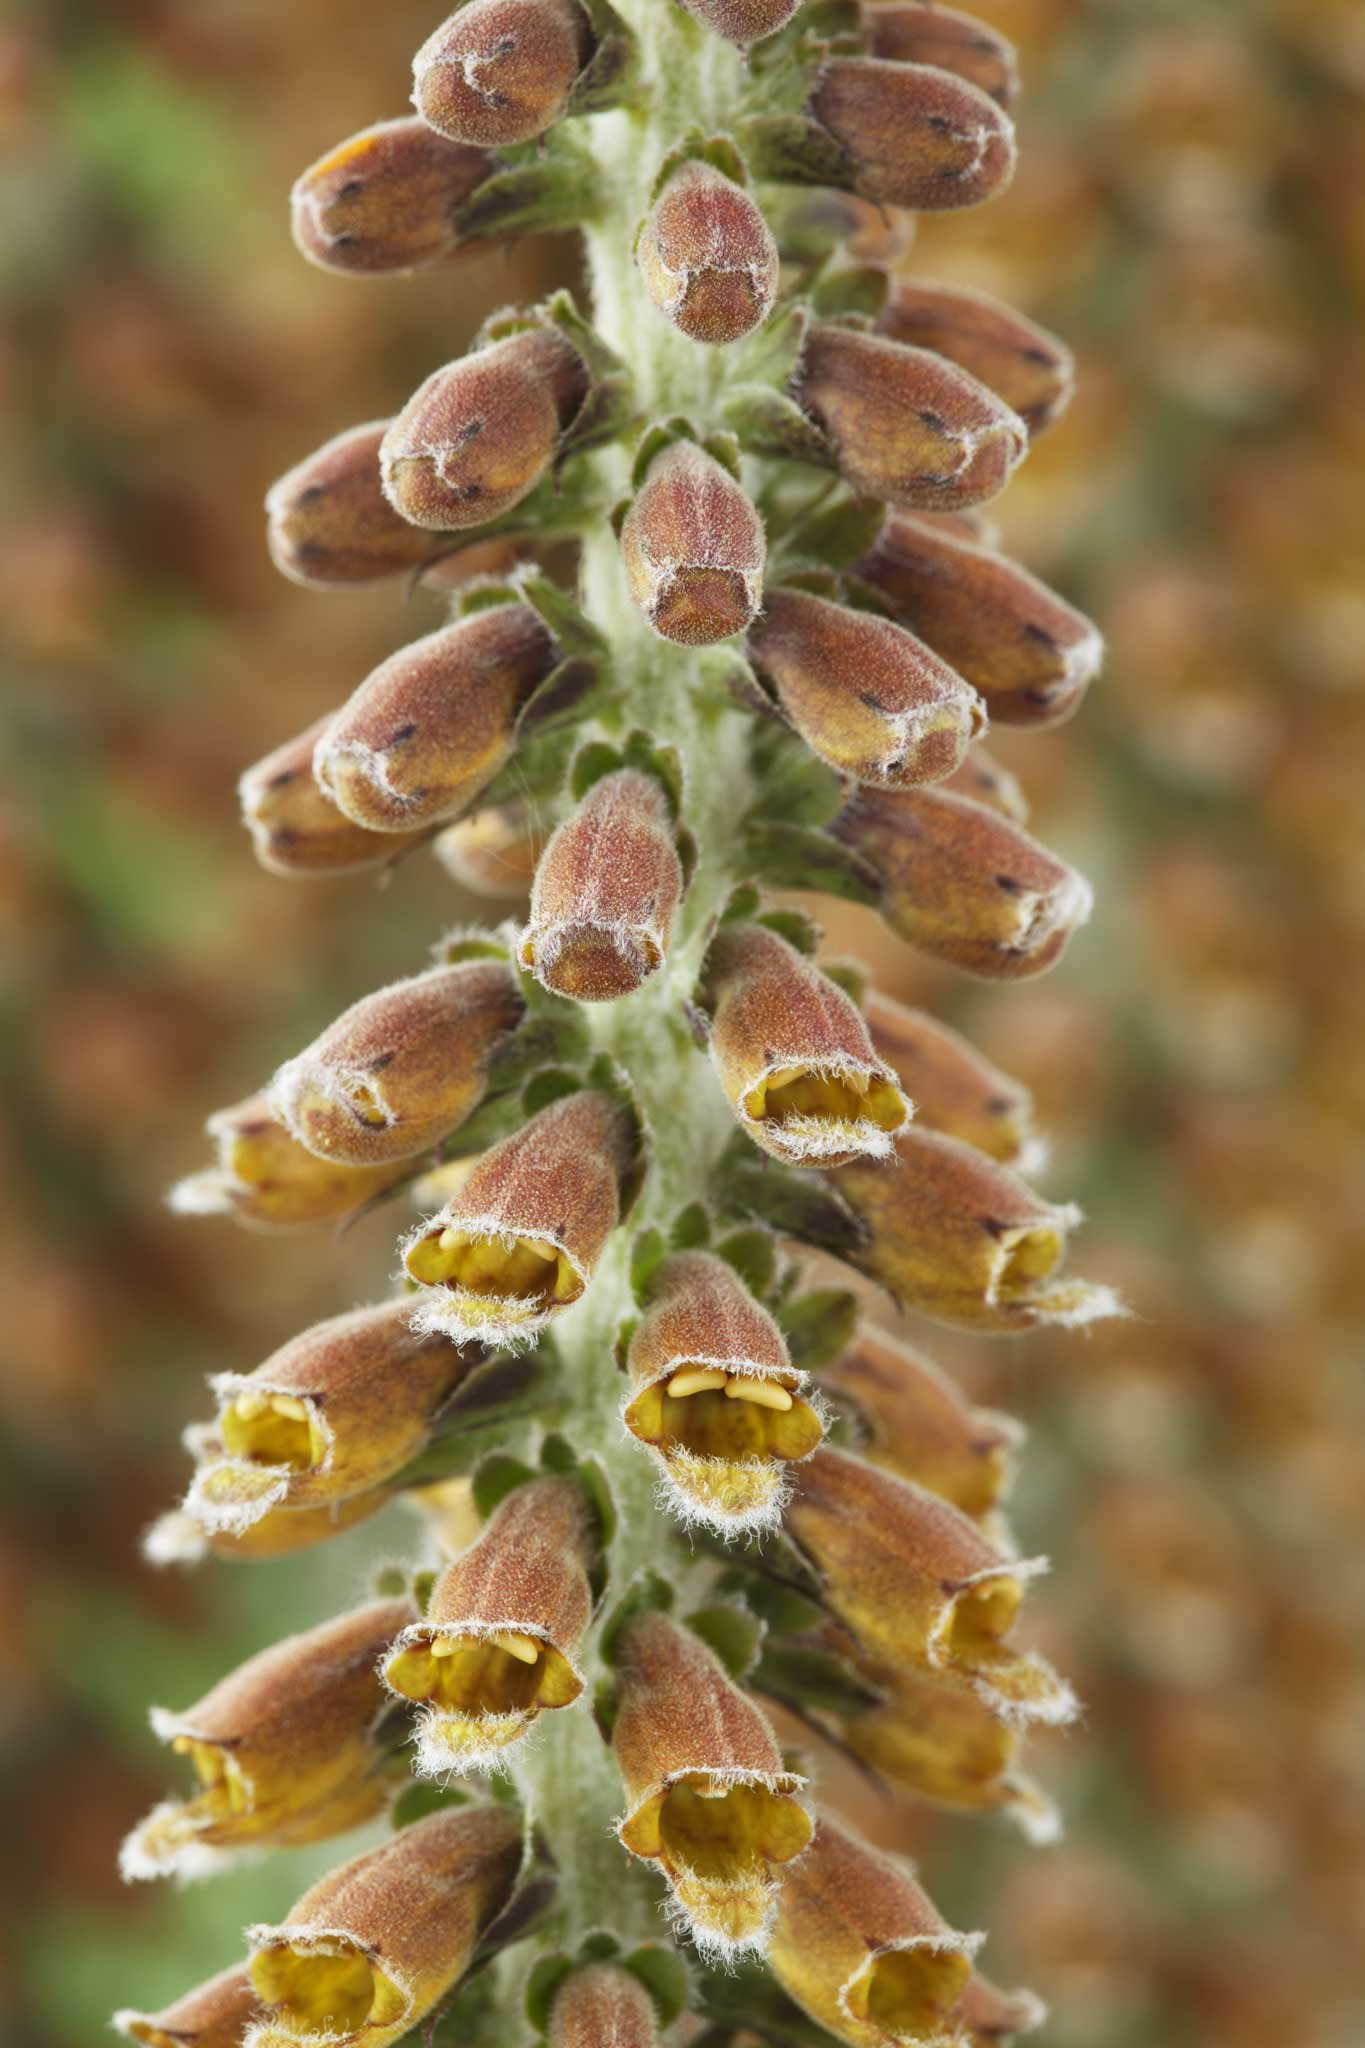 All because the lady loves: The foxglove 'digitalis parviflora', otherwise known as 'Milk Chocolate'